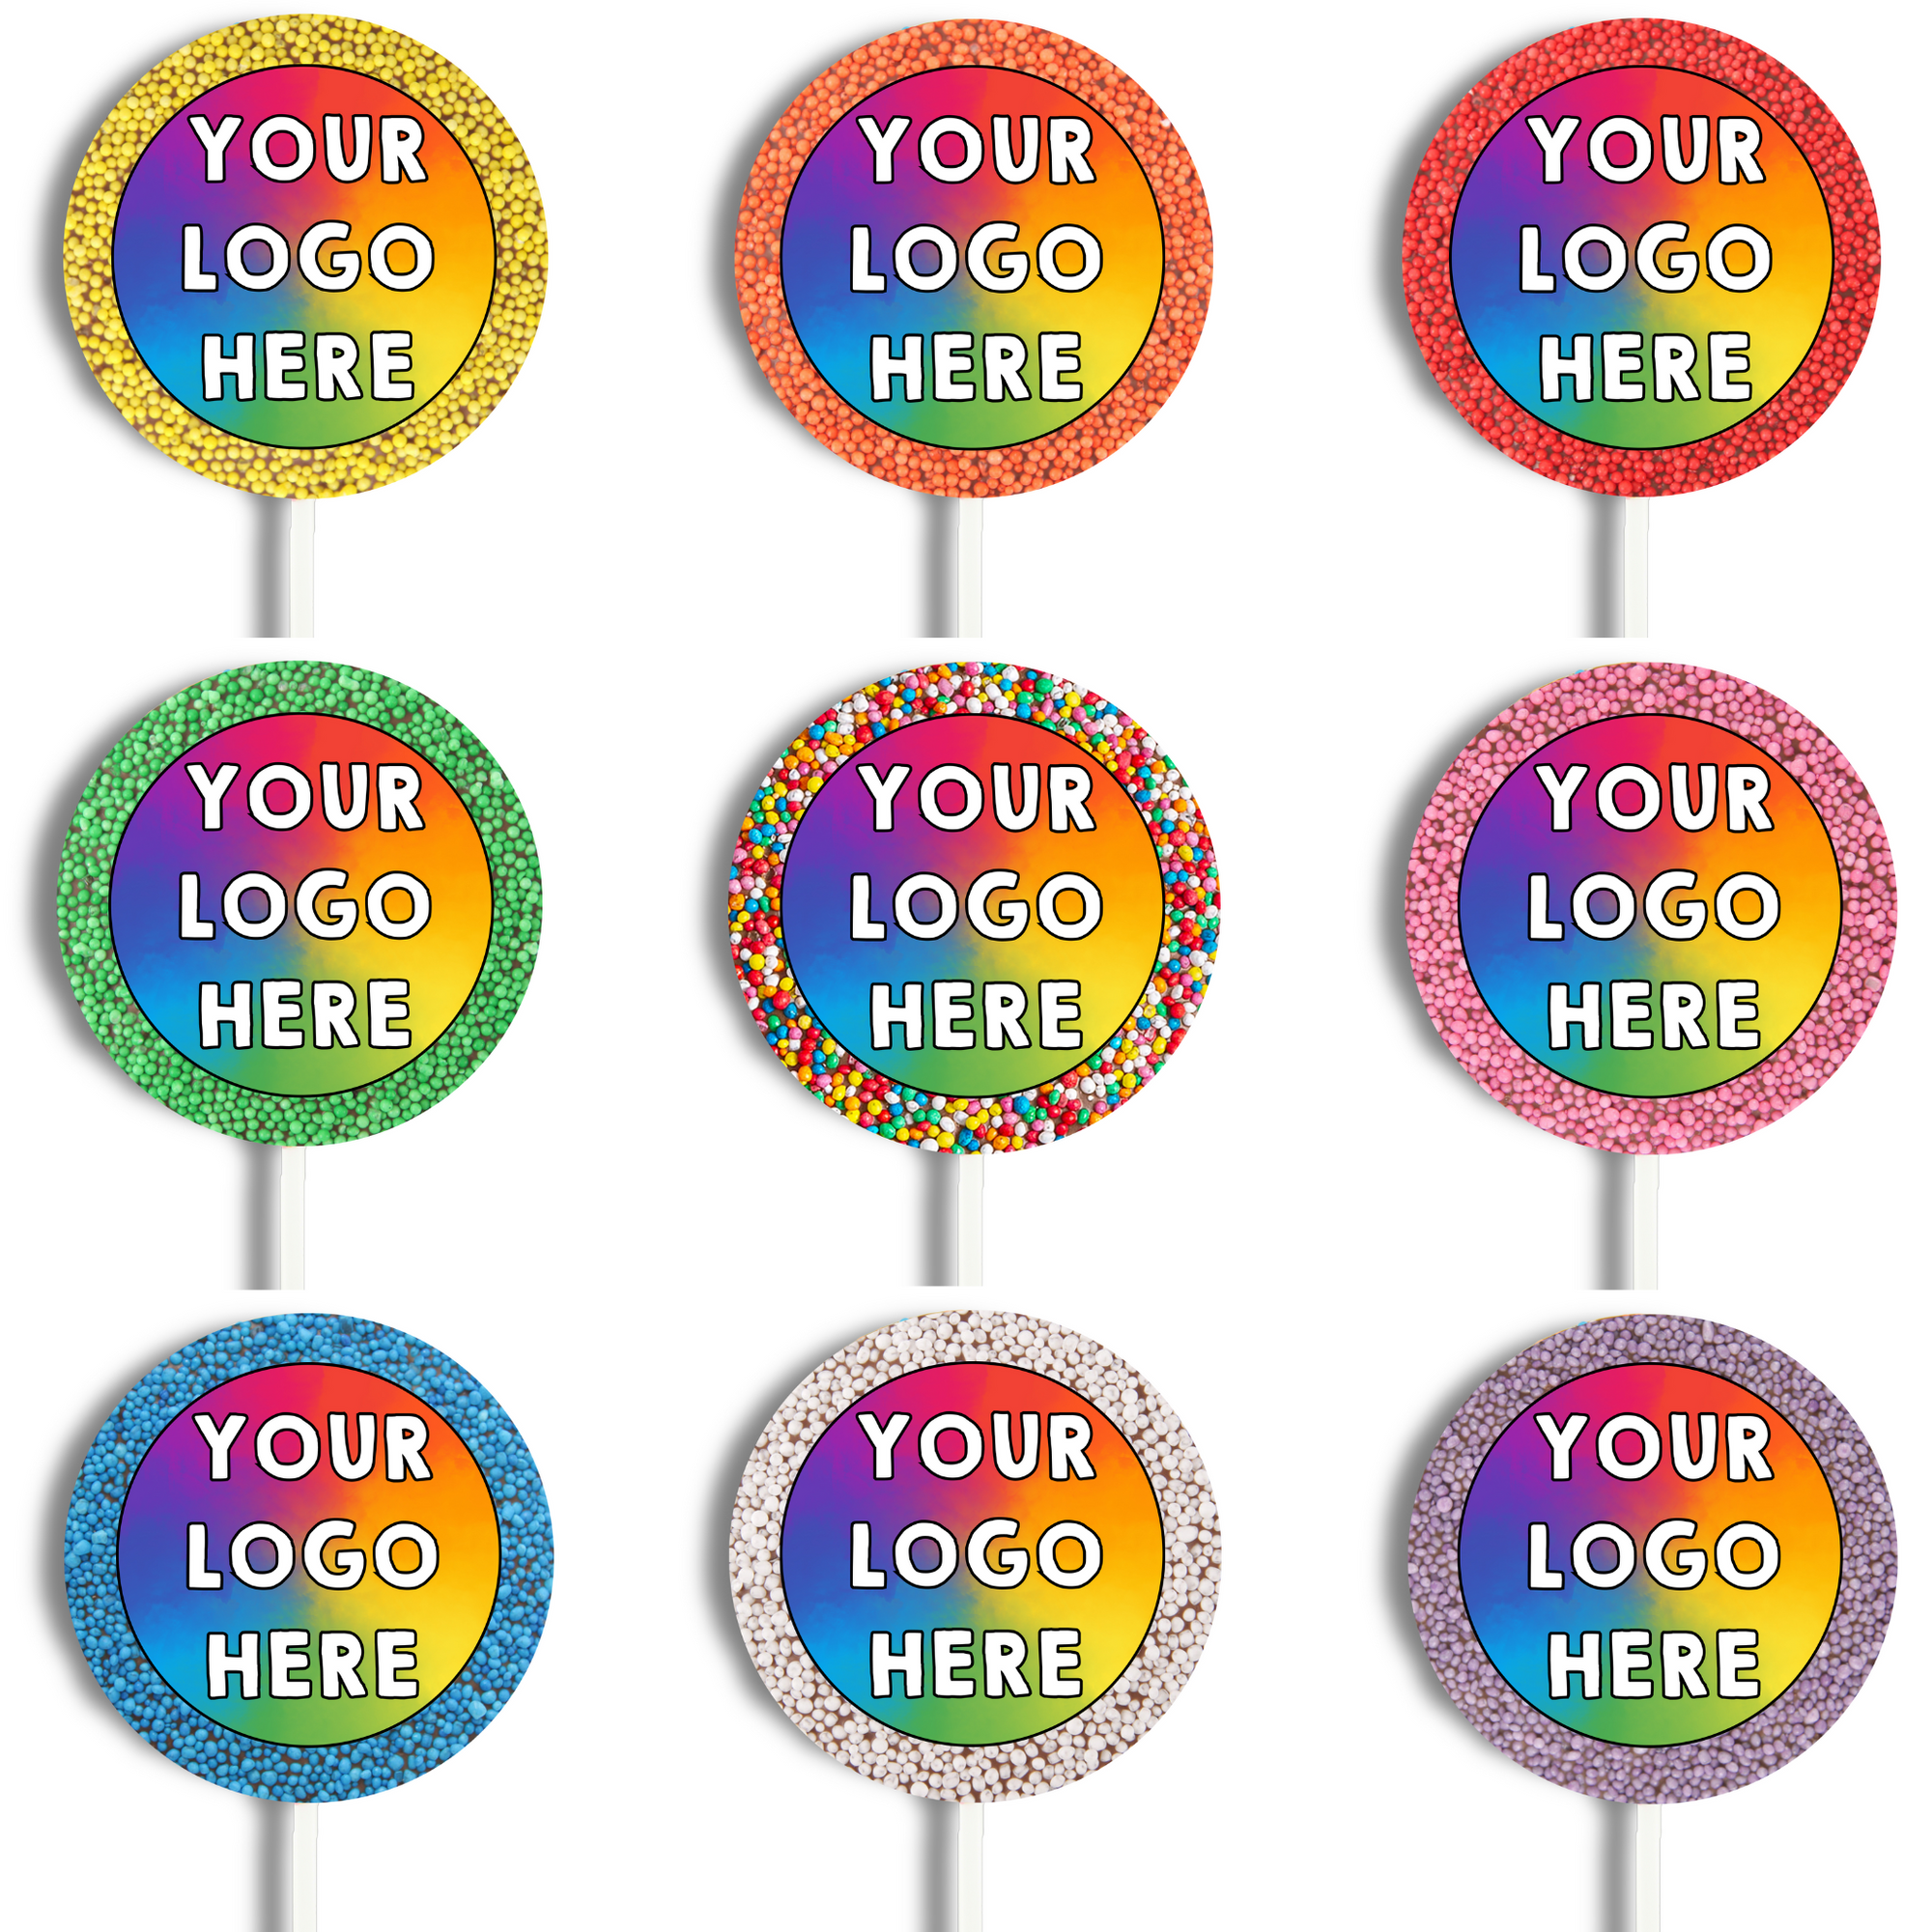 Corporate Personalised Chocolate Round Freckle Pop - Logo/Graphic Upload